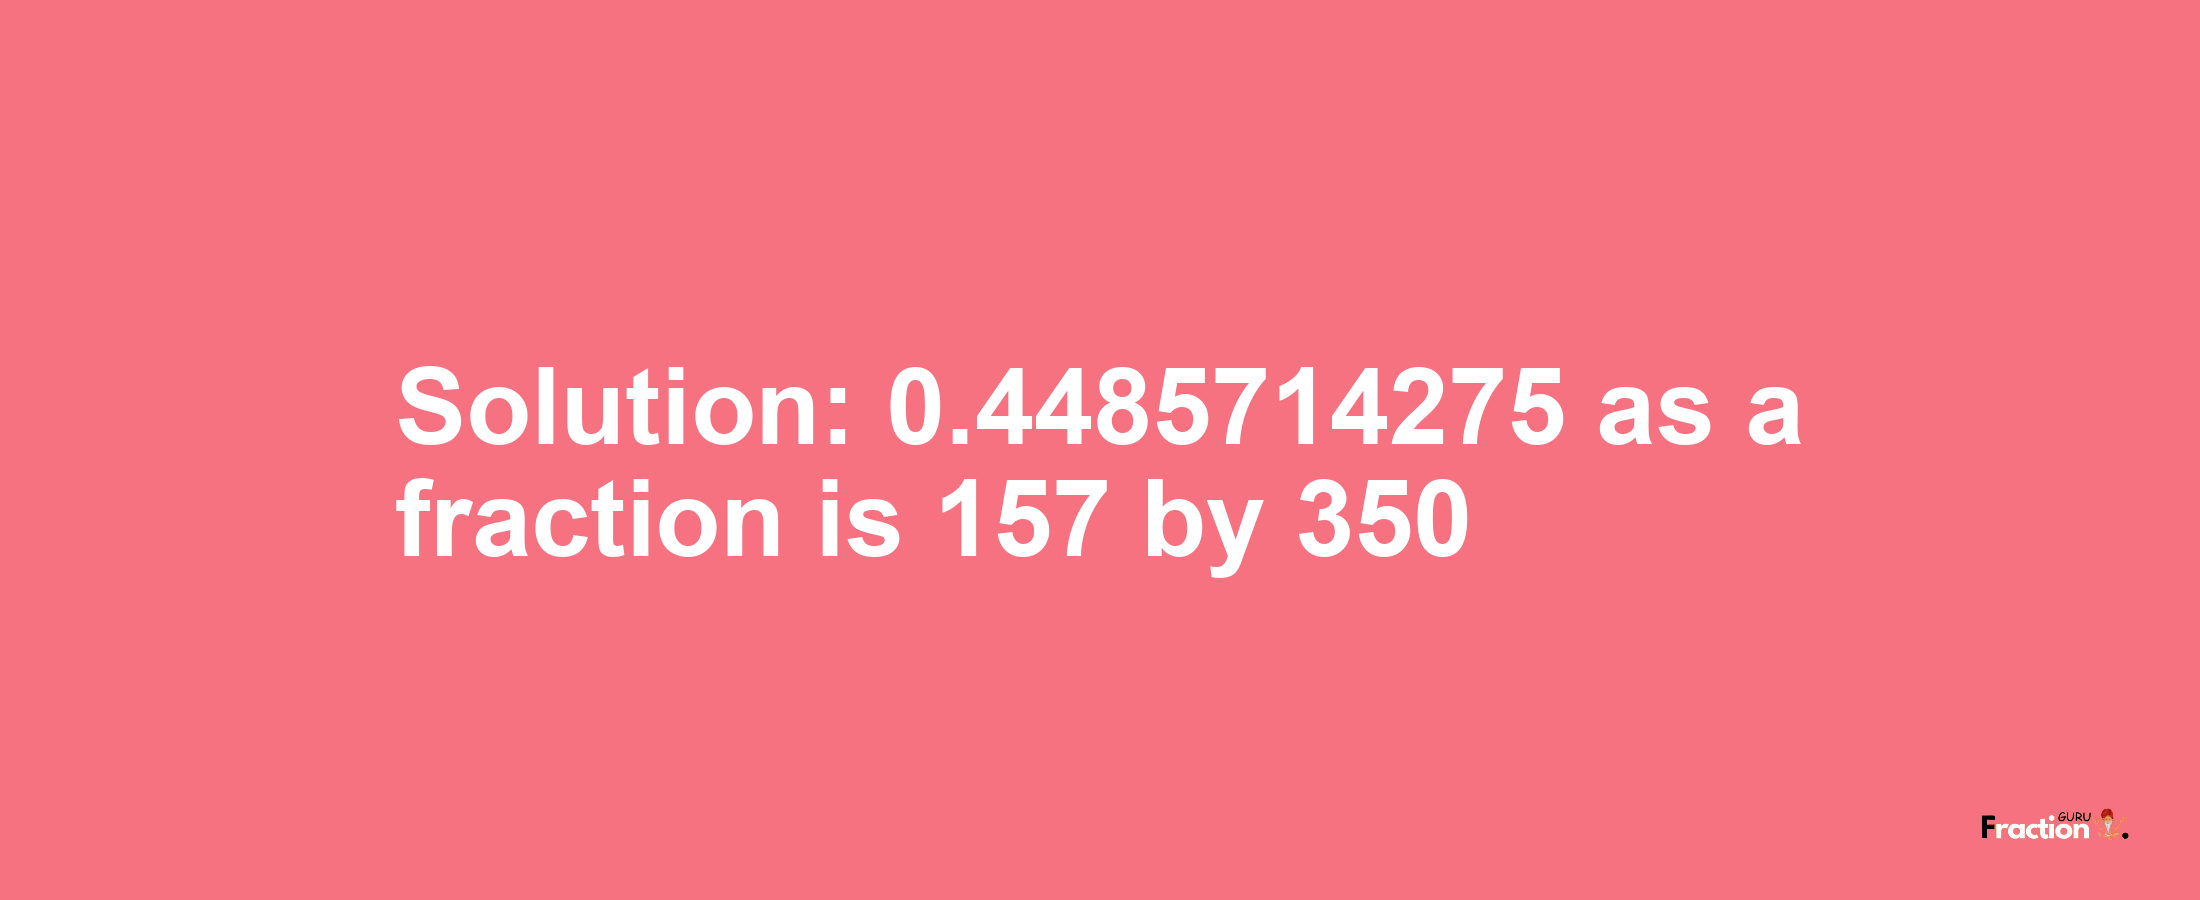 Solution:0.4485714275 as a fraction is 157/350